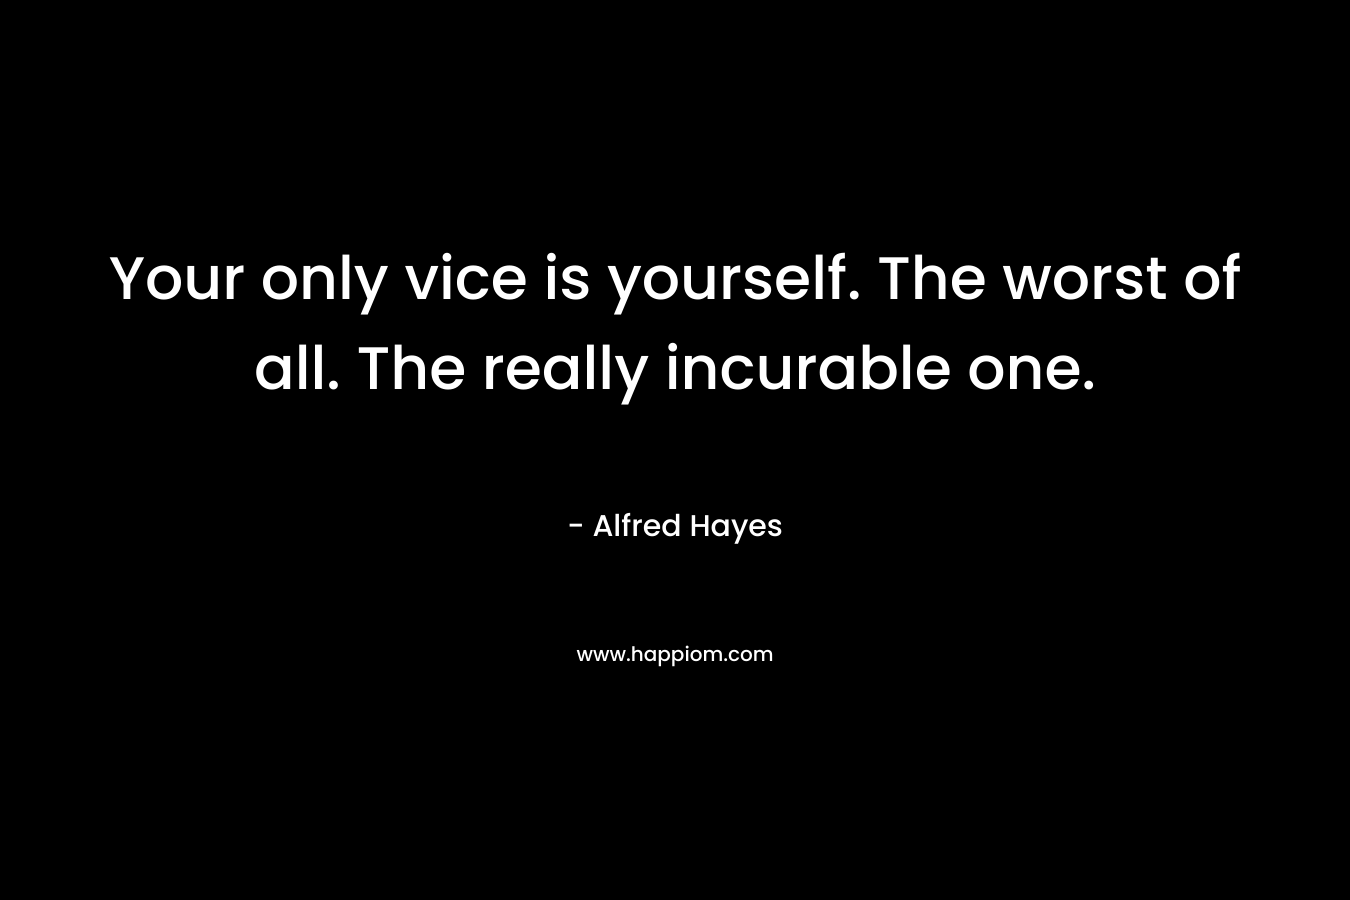 Your only vice is yourself. The worst of all. The really incurable one. – Alfred Hayes